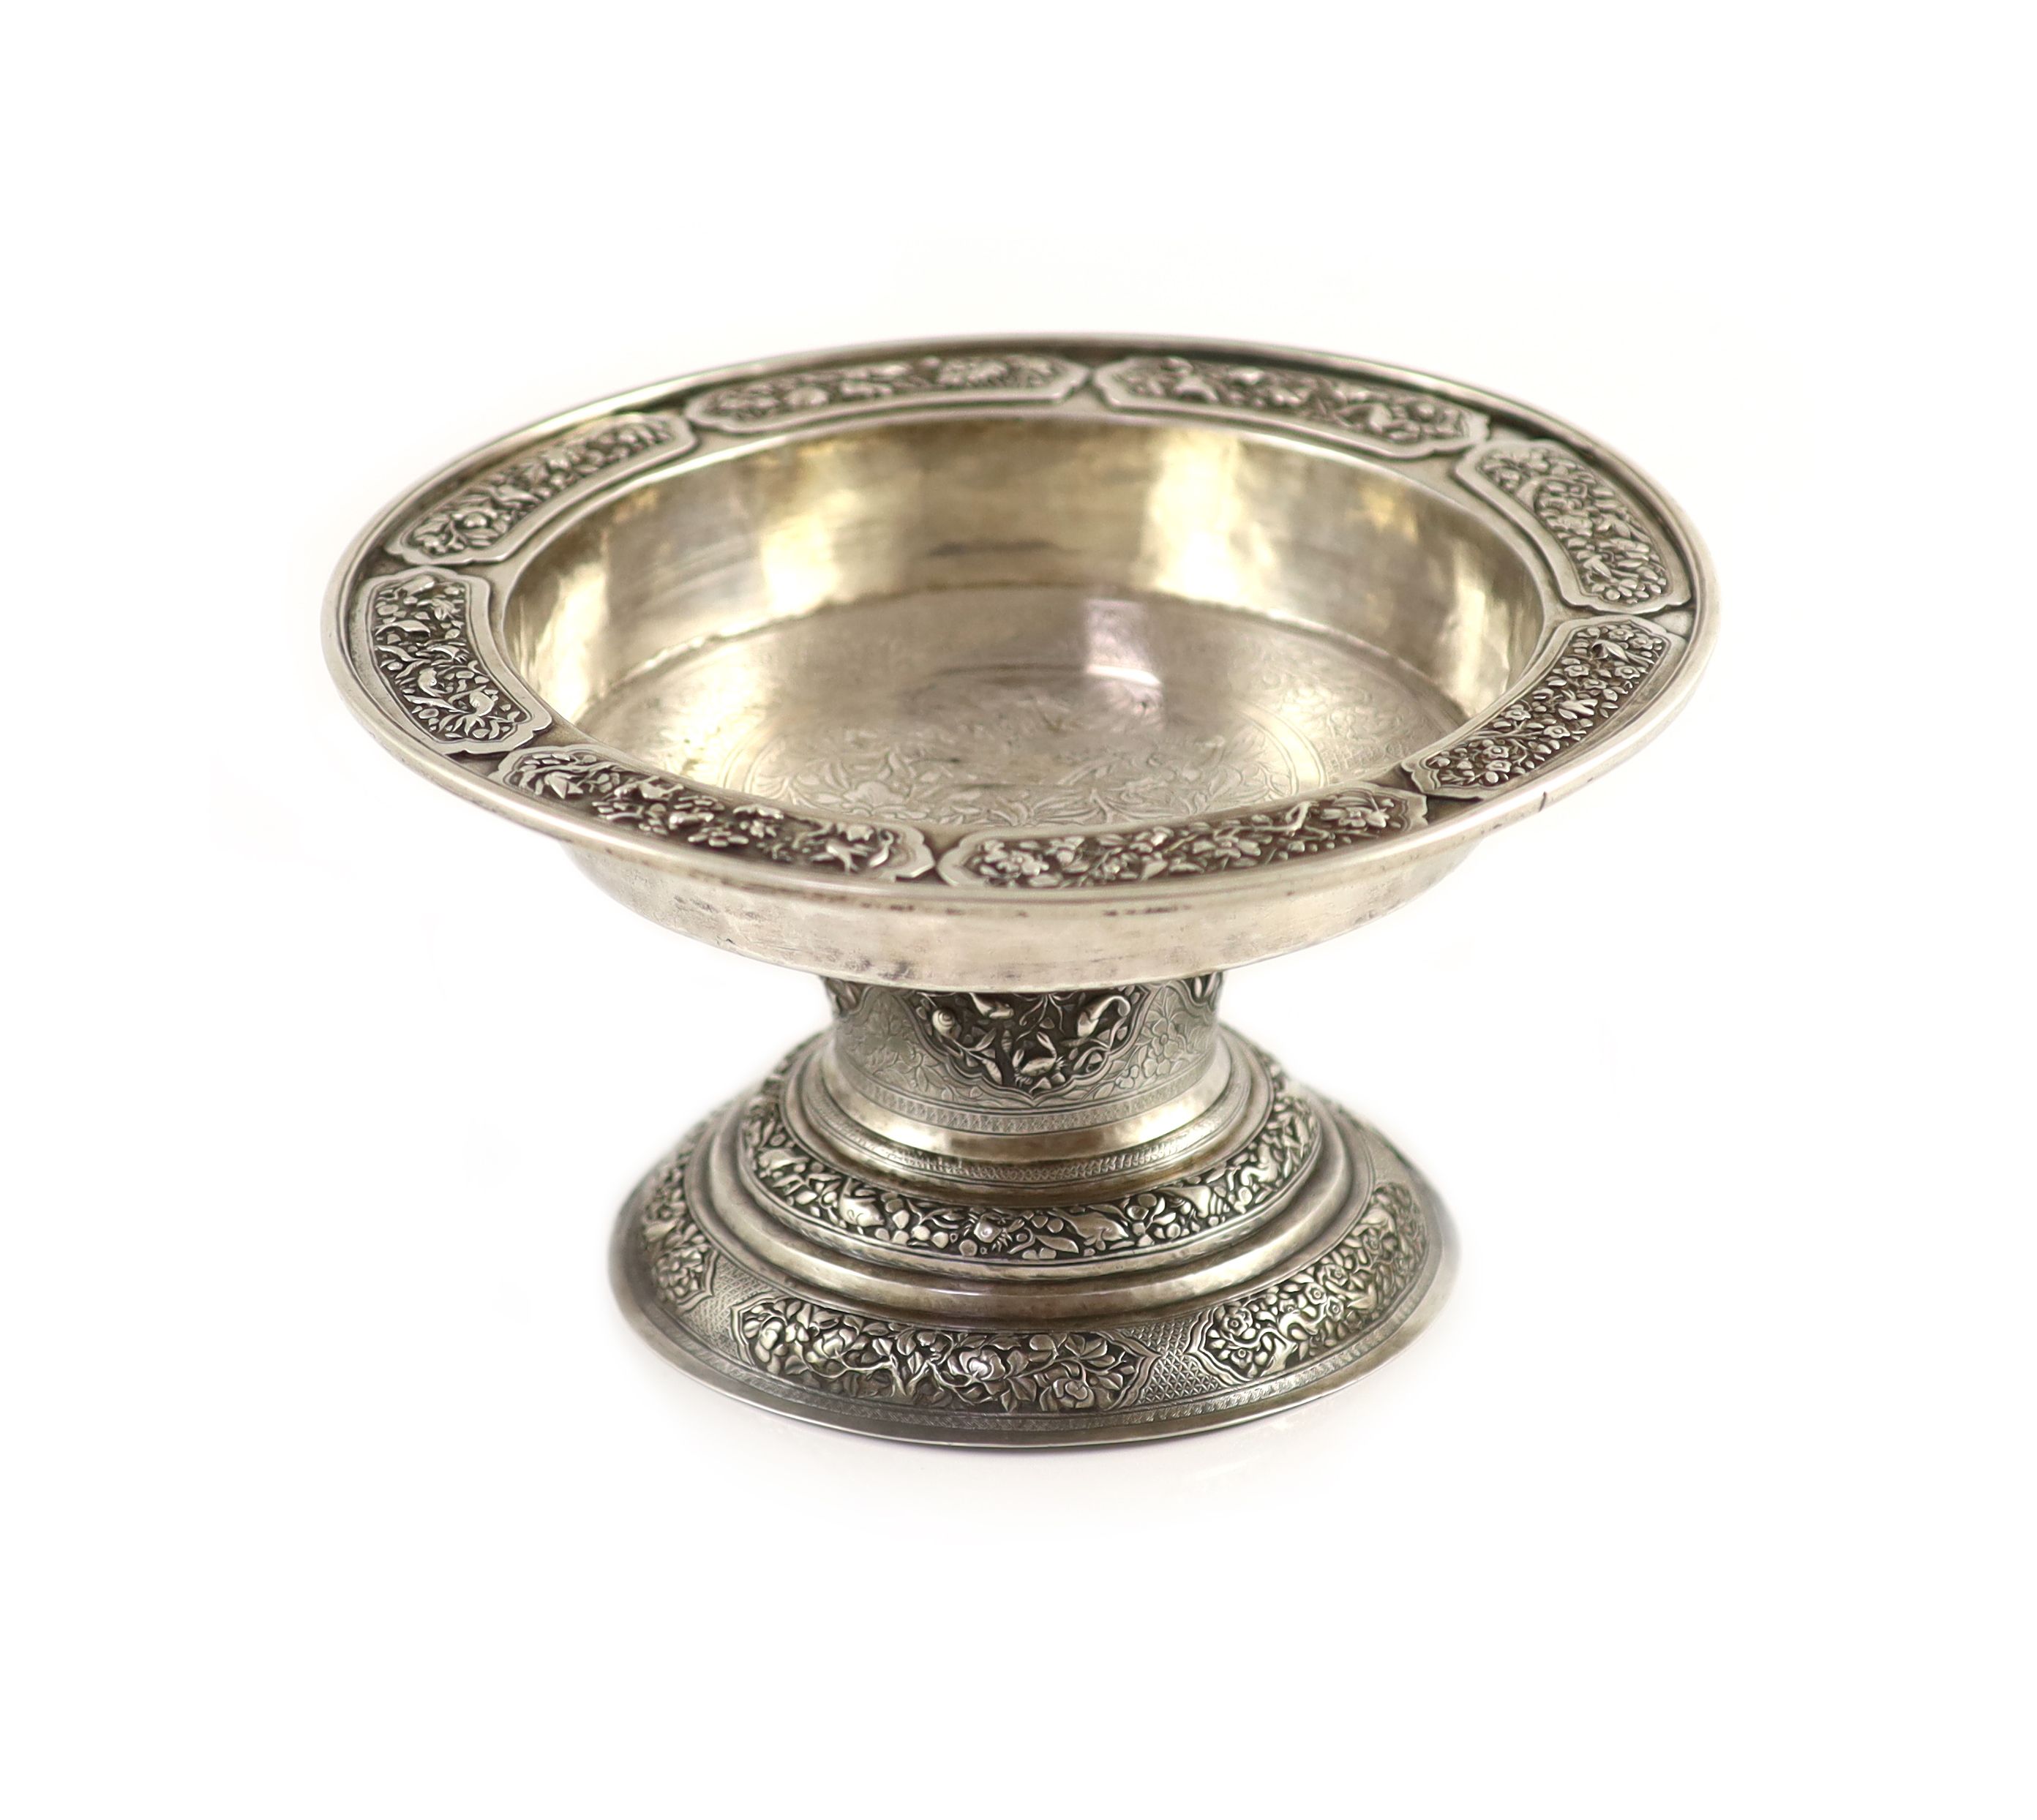 A late 19th/early 20th century South East Asian silver pedestal bowl                                                                                                                                                        